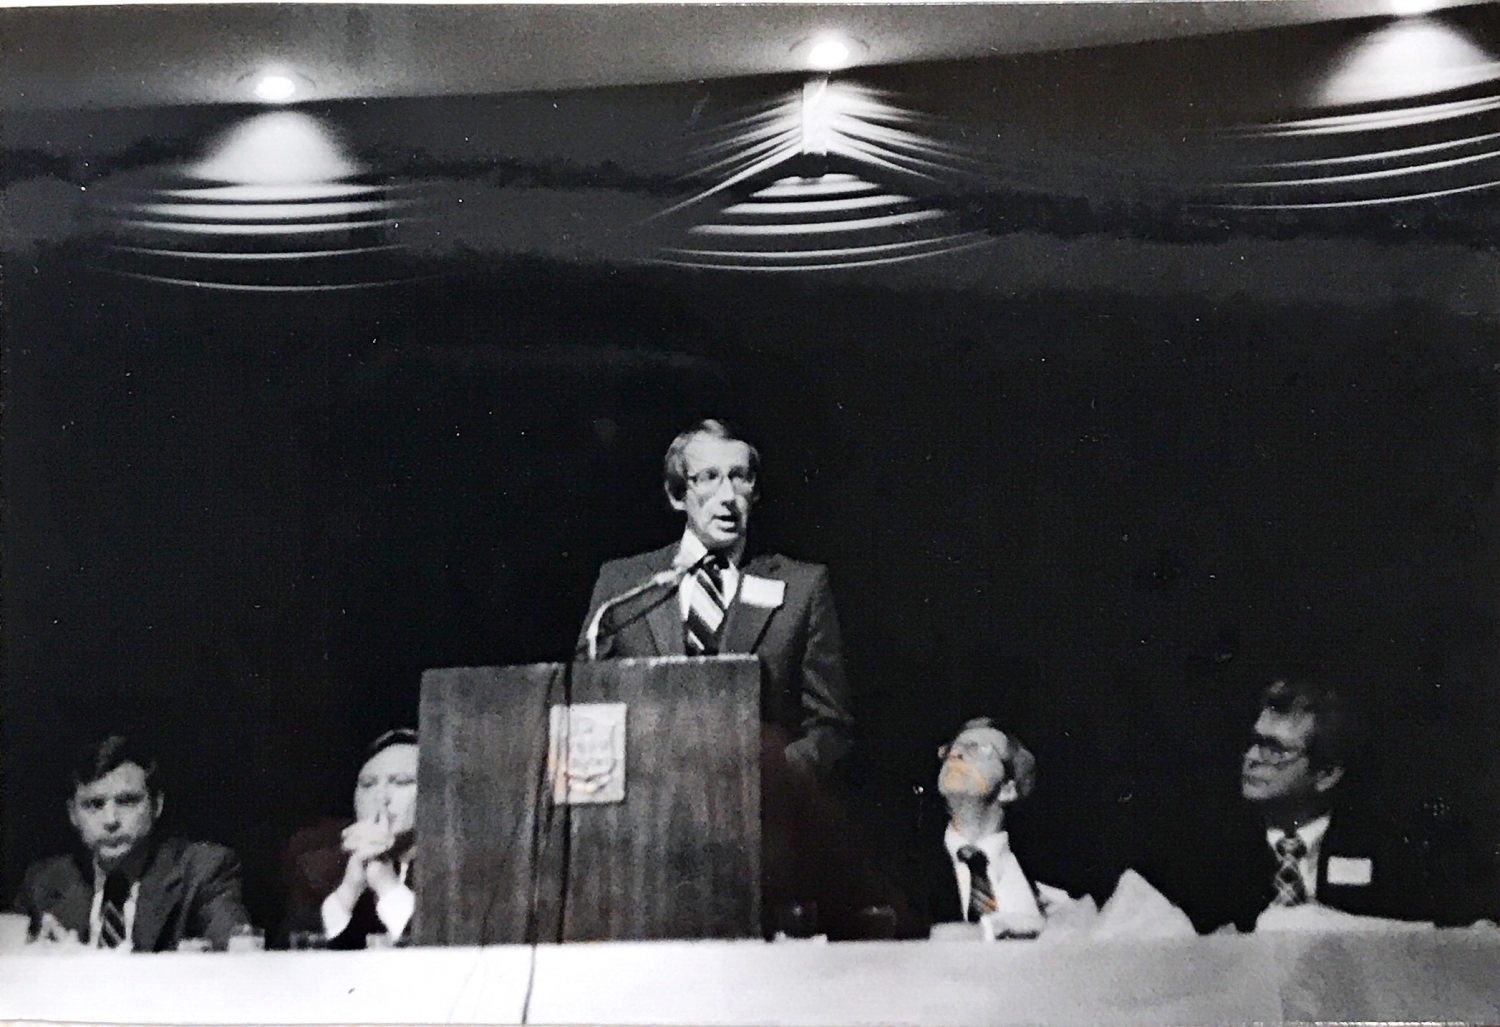 Our year-end banquet in 1980